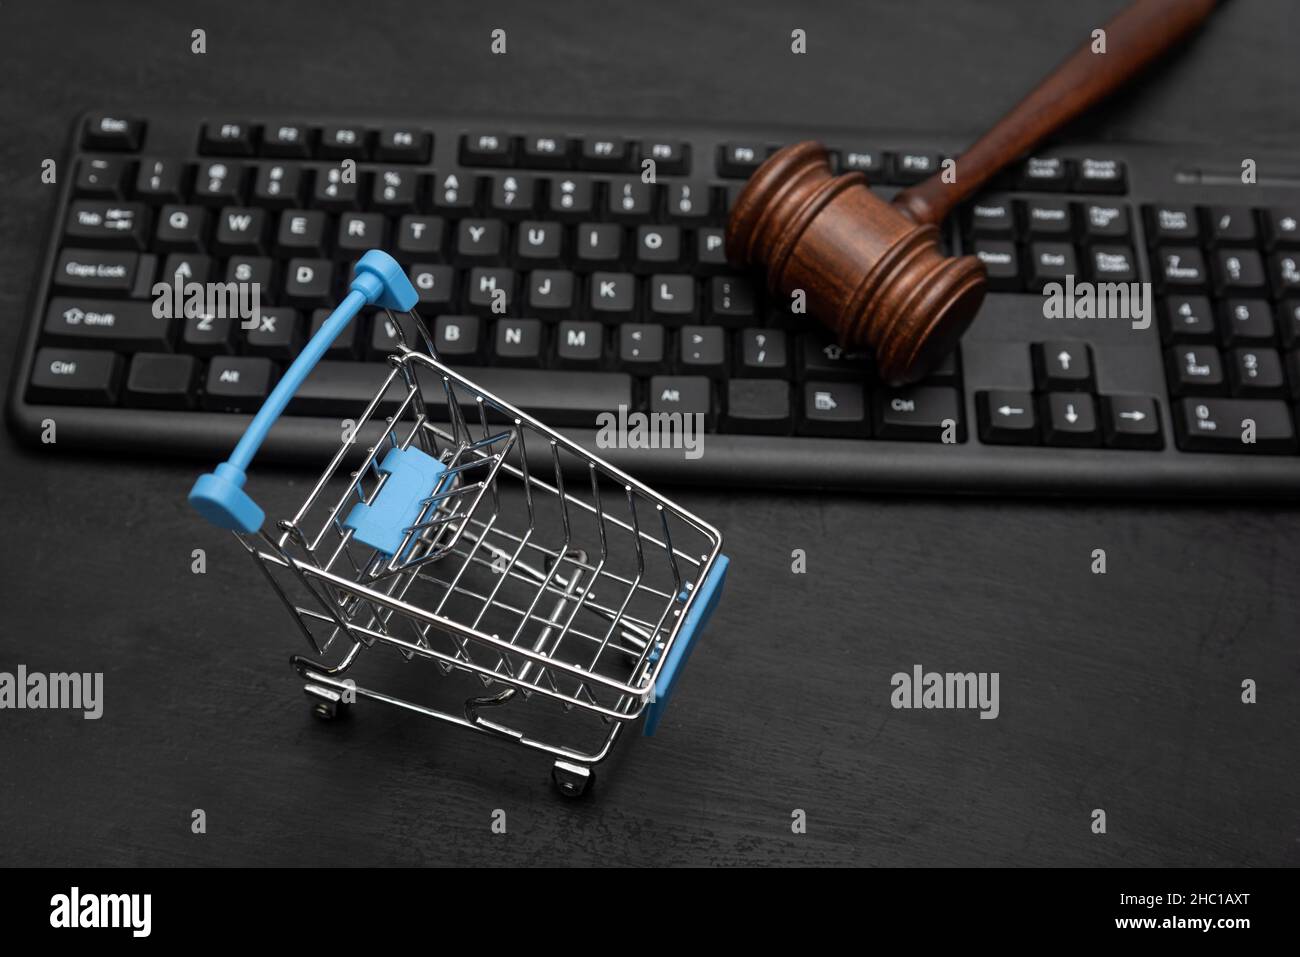 Shopping cart and judge's hammer on the keyboard. Litigation with the seller. Black background Stock Photo